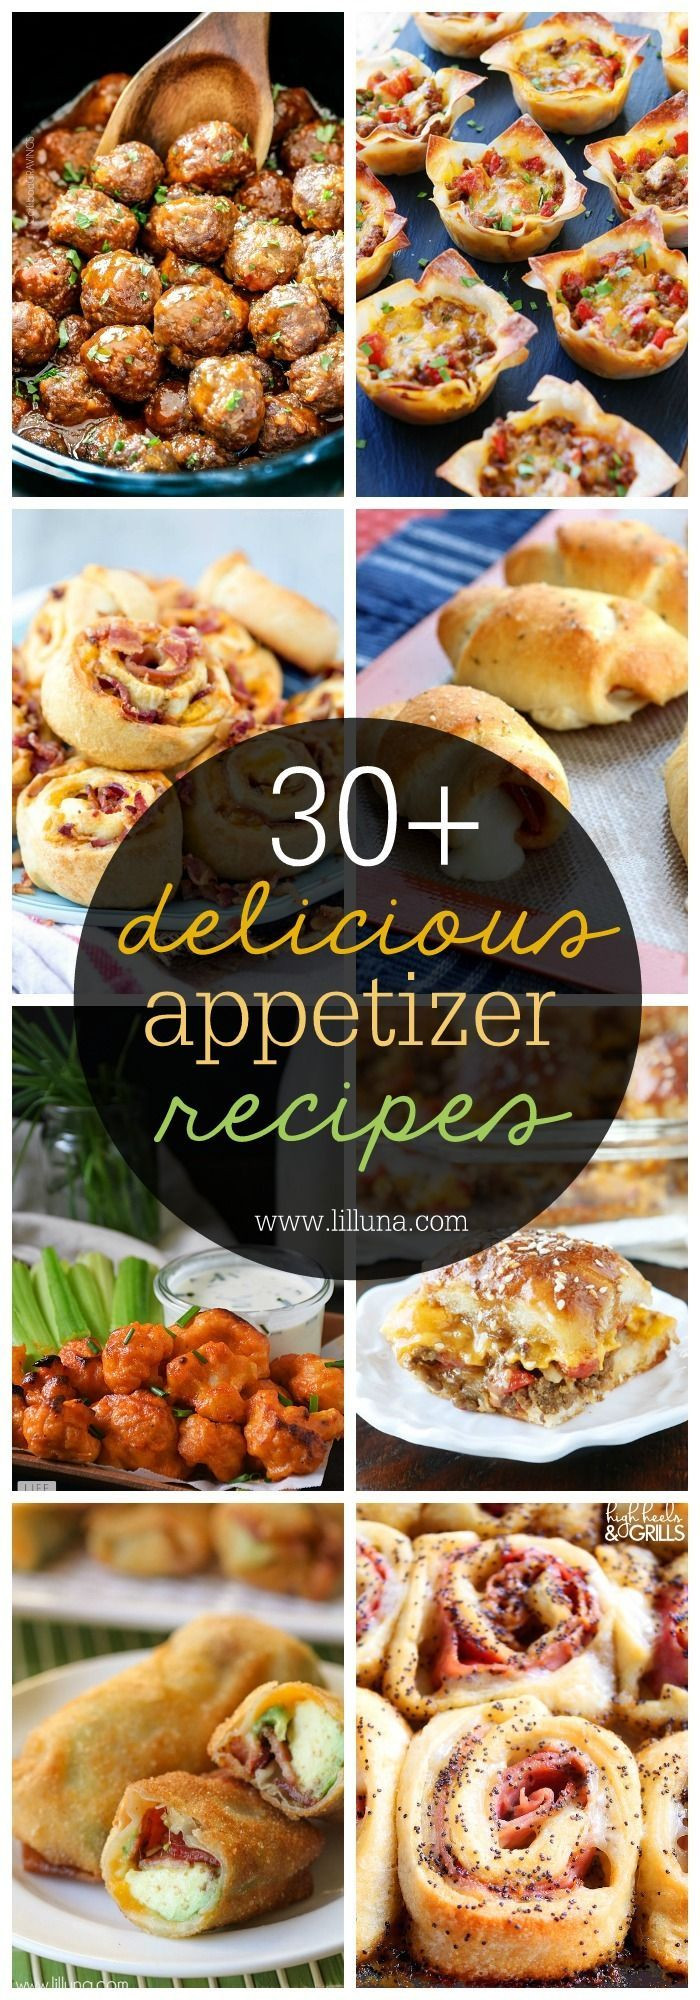 Great Holiday Party Food Ideas
 30 Appetizer Recipes a great collection for parties